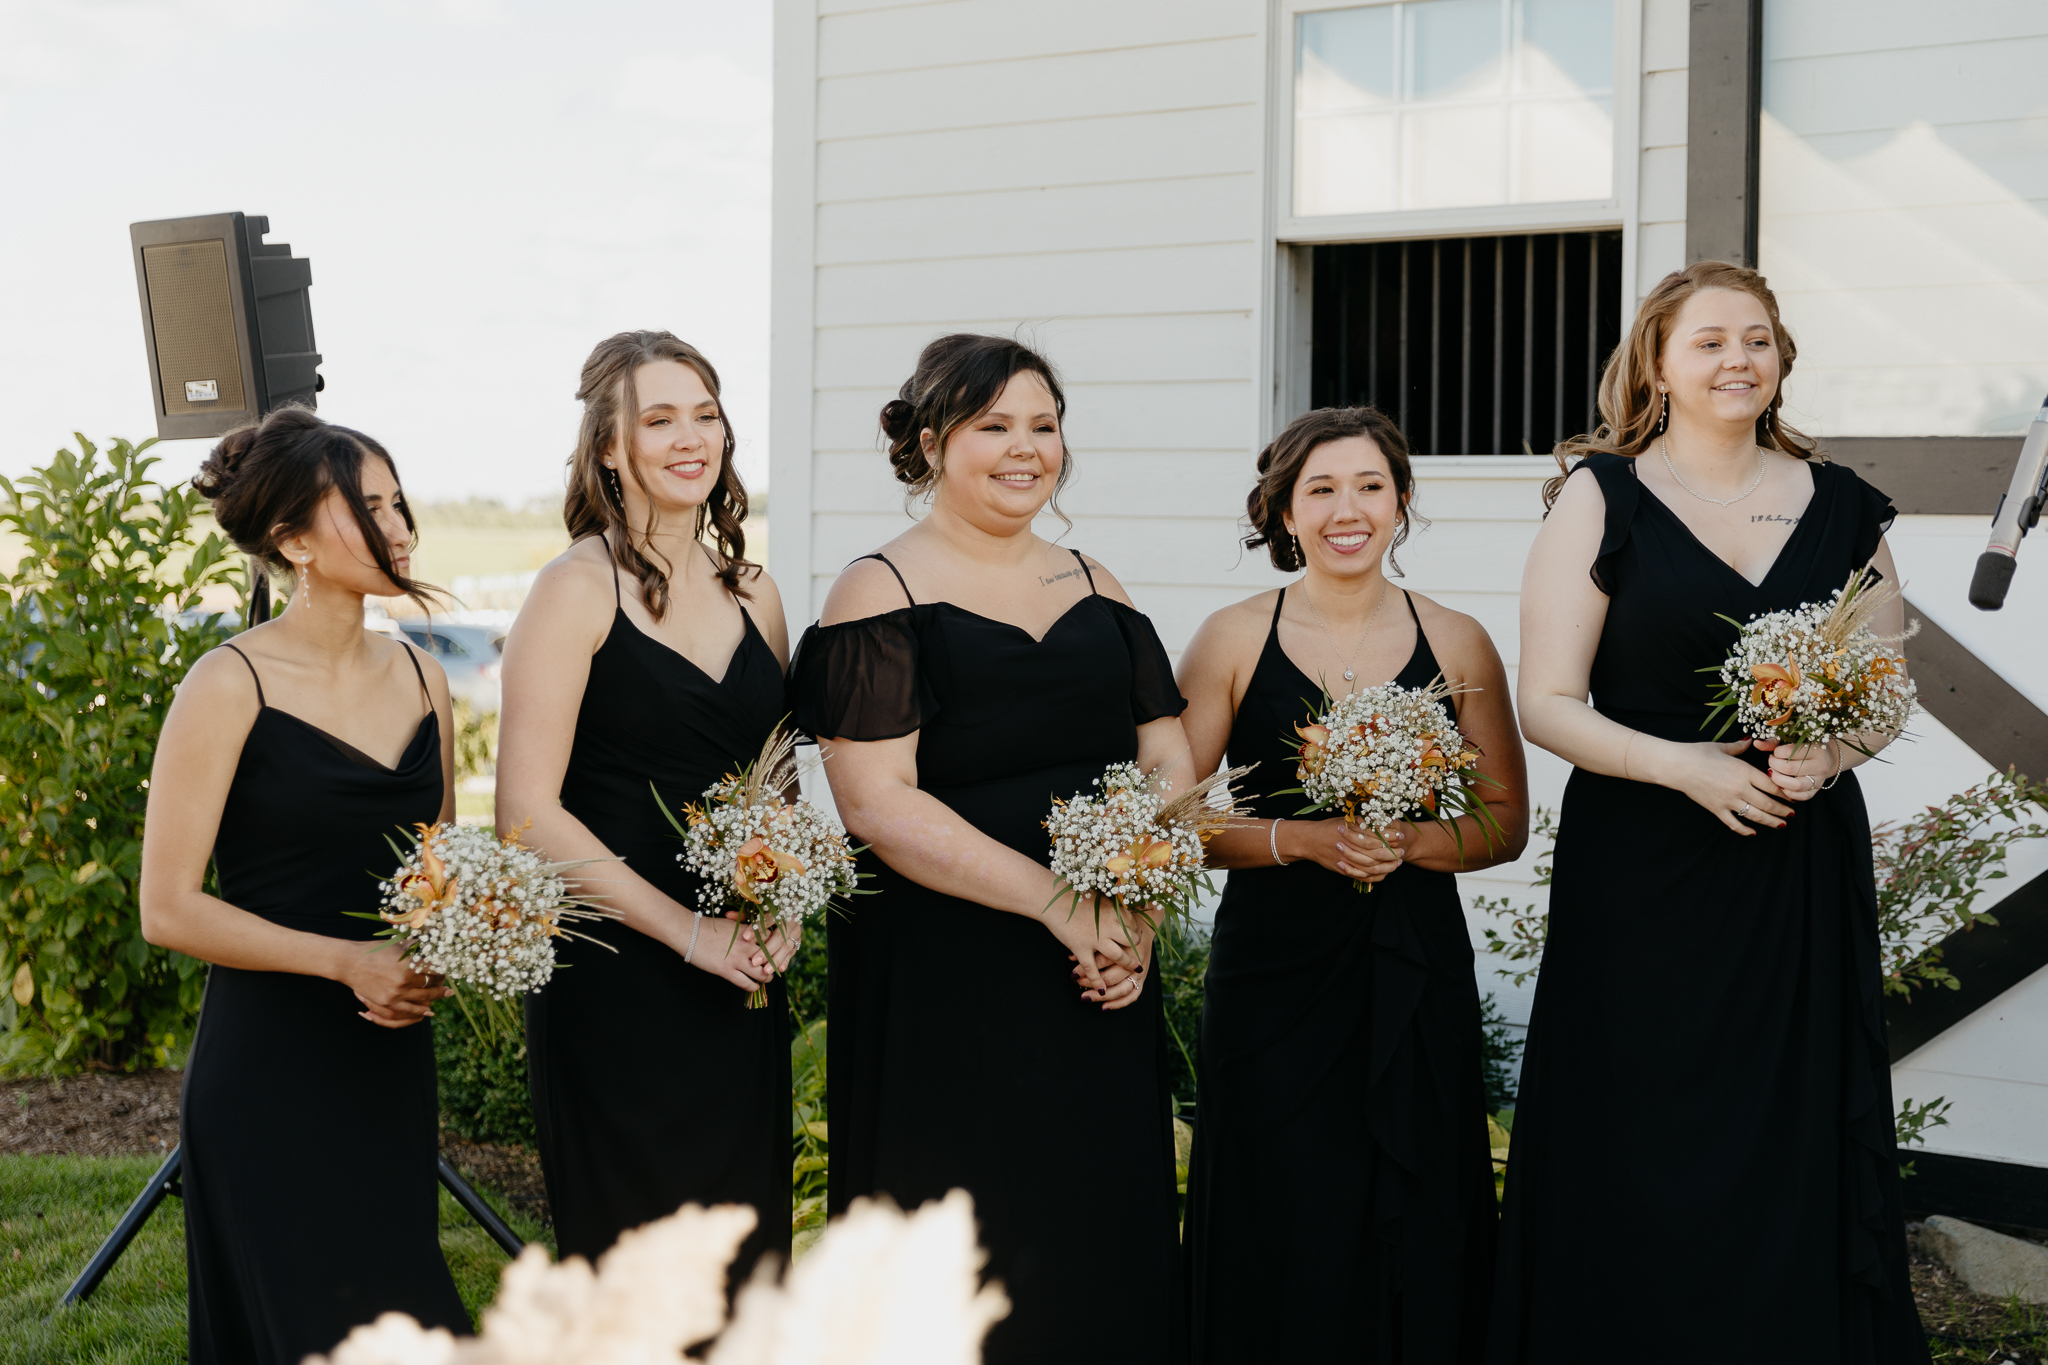 Bridesmaids lined up and watching the wedding ceremony at a horse farm